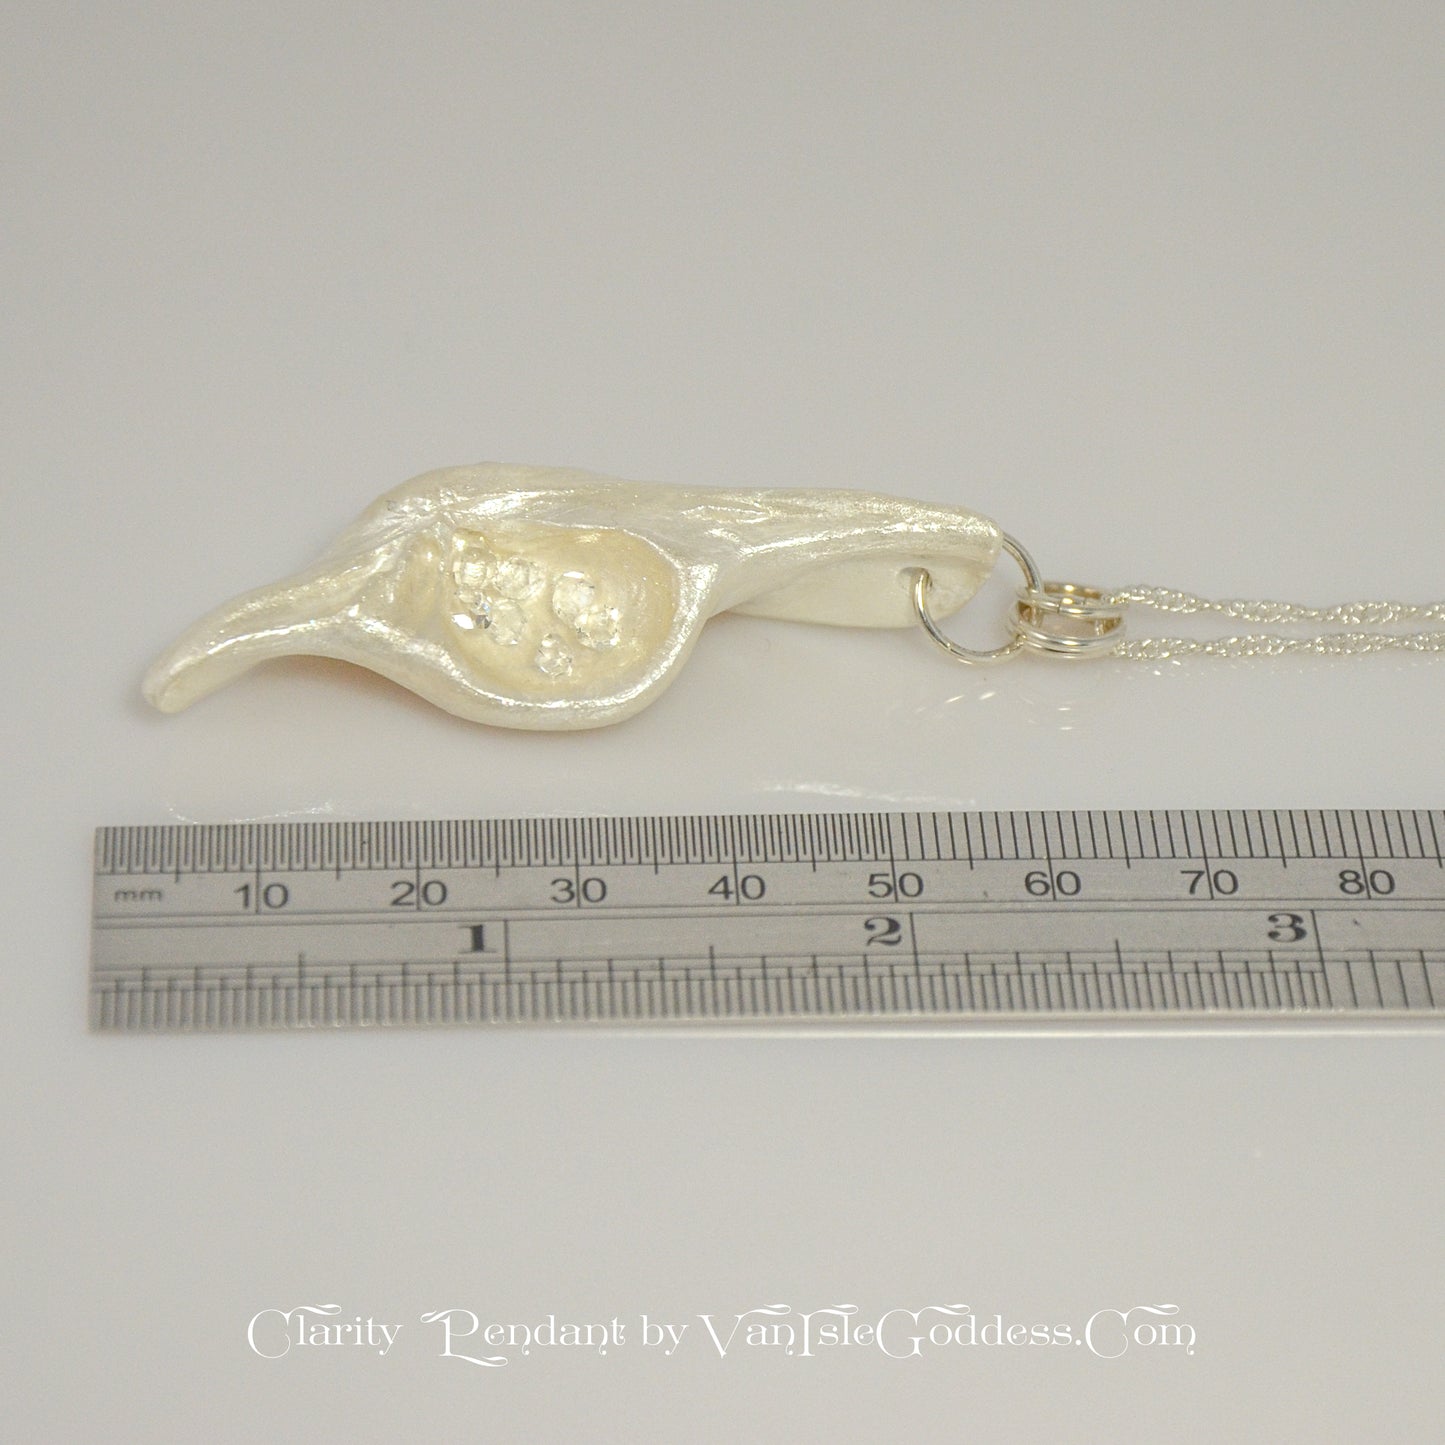 The pendant is shown on its side along a ruler so the viewer can see the length of the pendant.